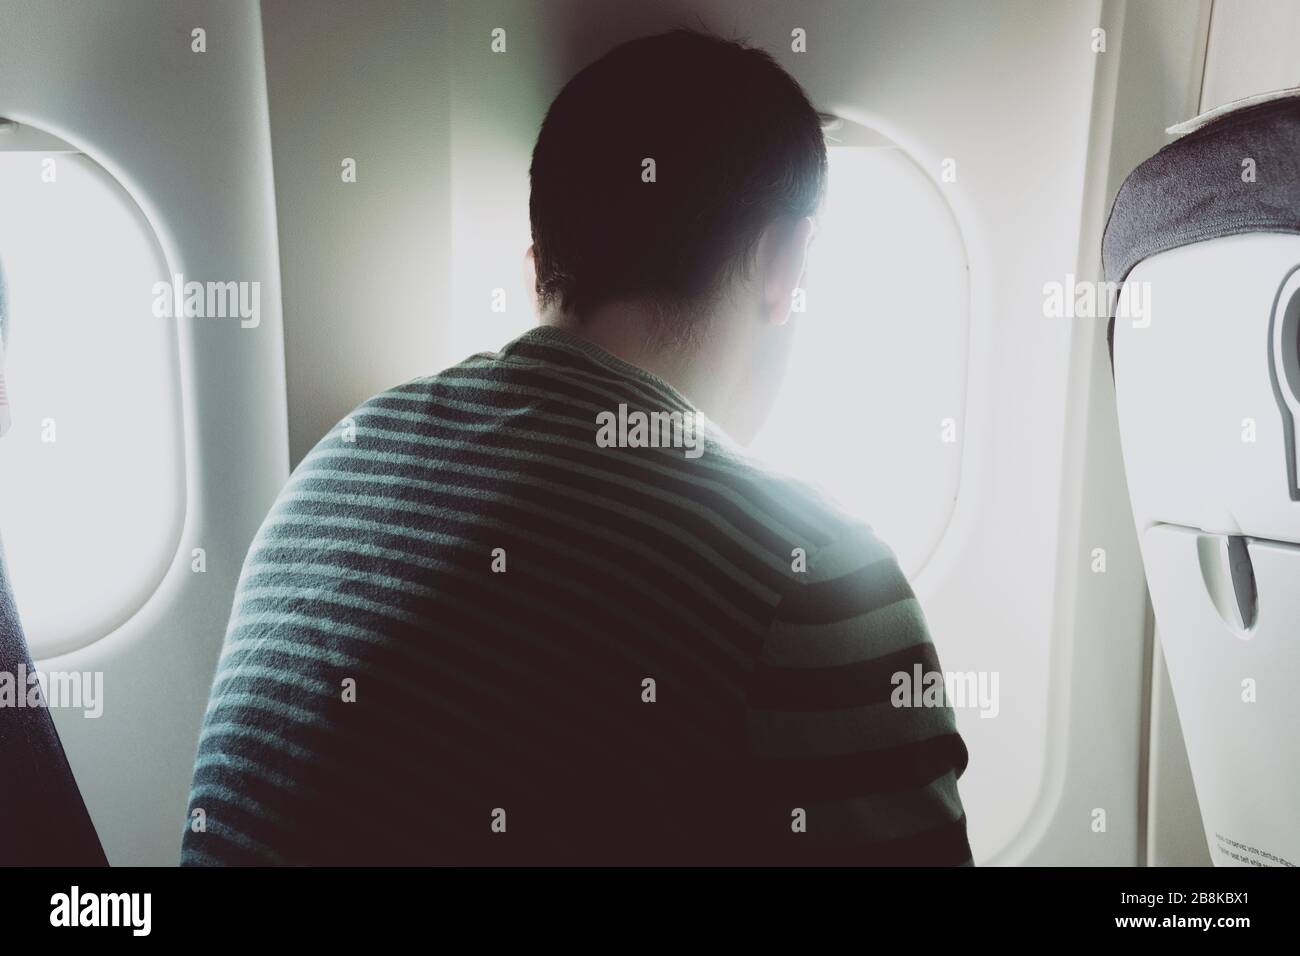 A back view of a man seated on an airplane, watching the view from the plane window. Stock Photo